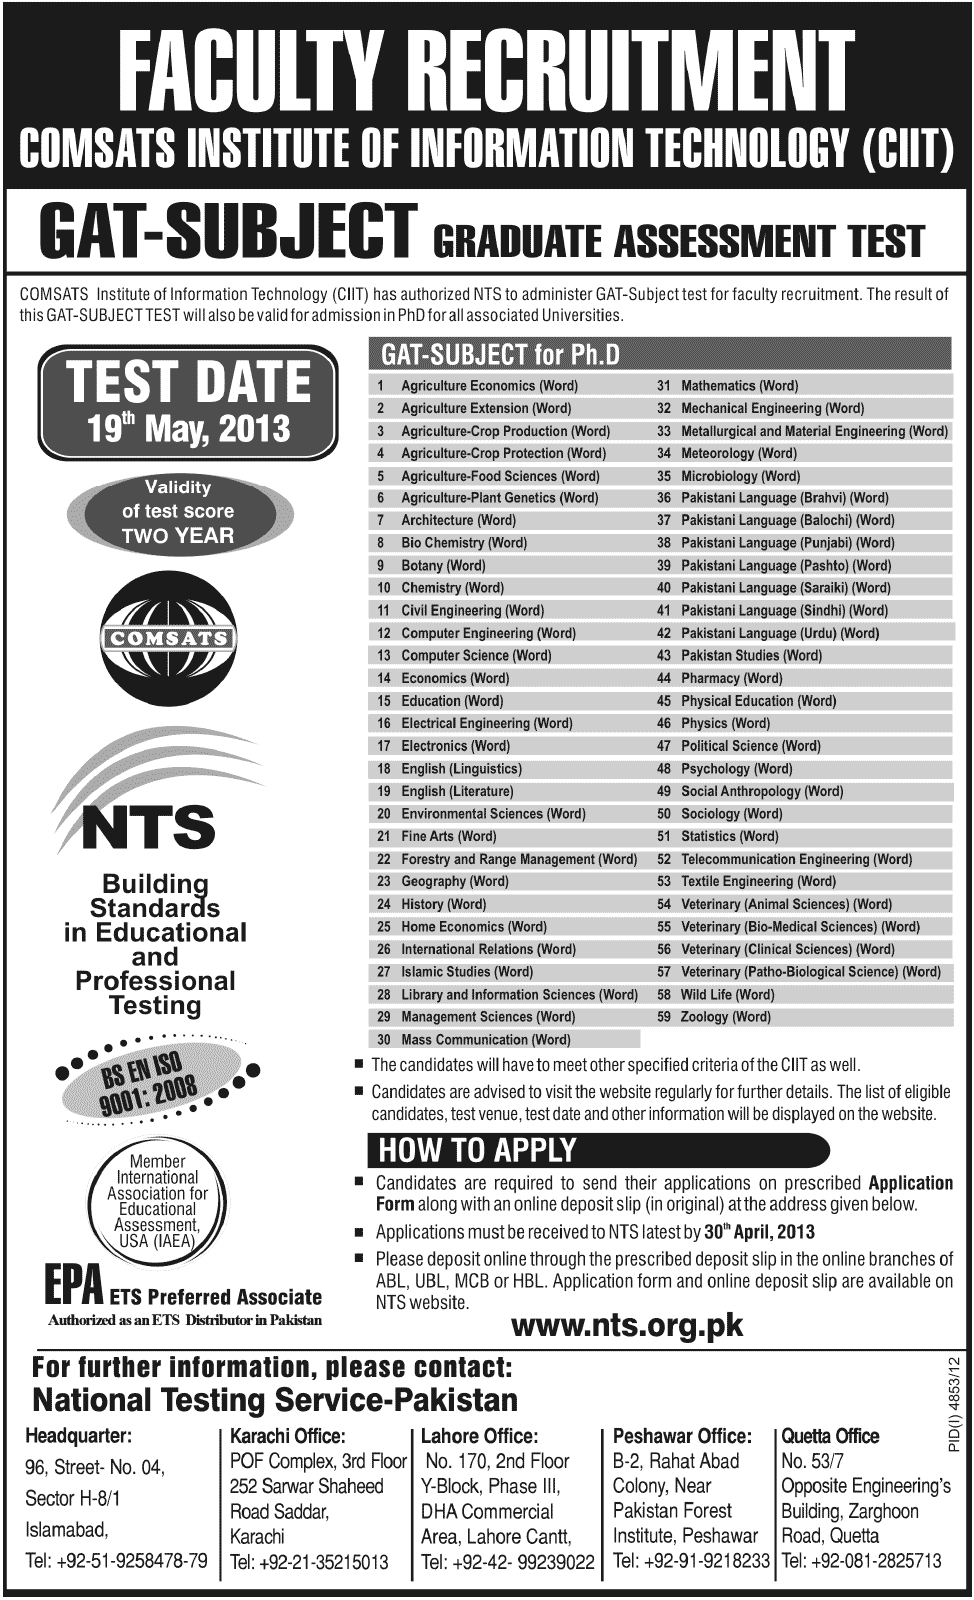 Faculty Recruitment Comsats Institute NTS Test May 2013